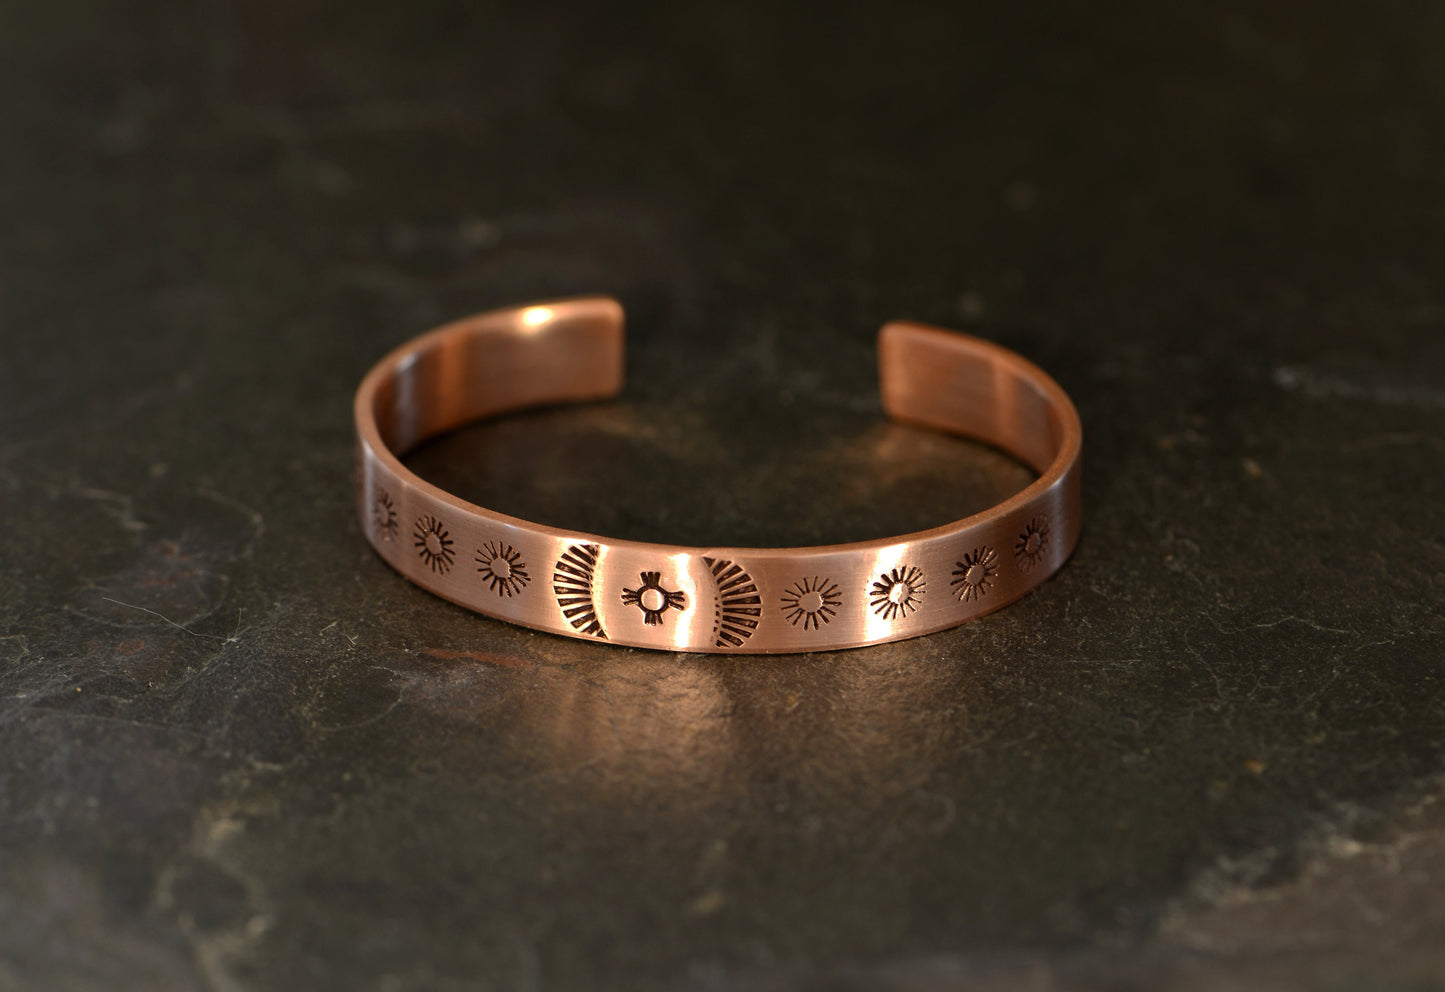 Cuff bracelet hand stamped with zia symbol and southwestern patterns in copper